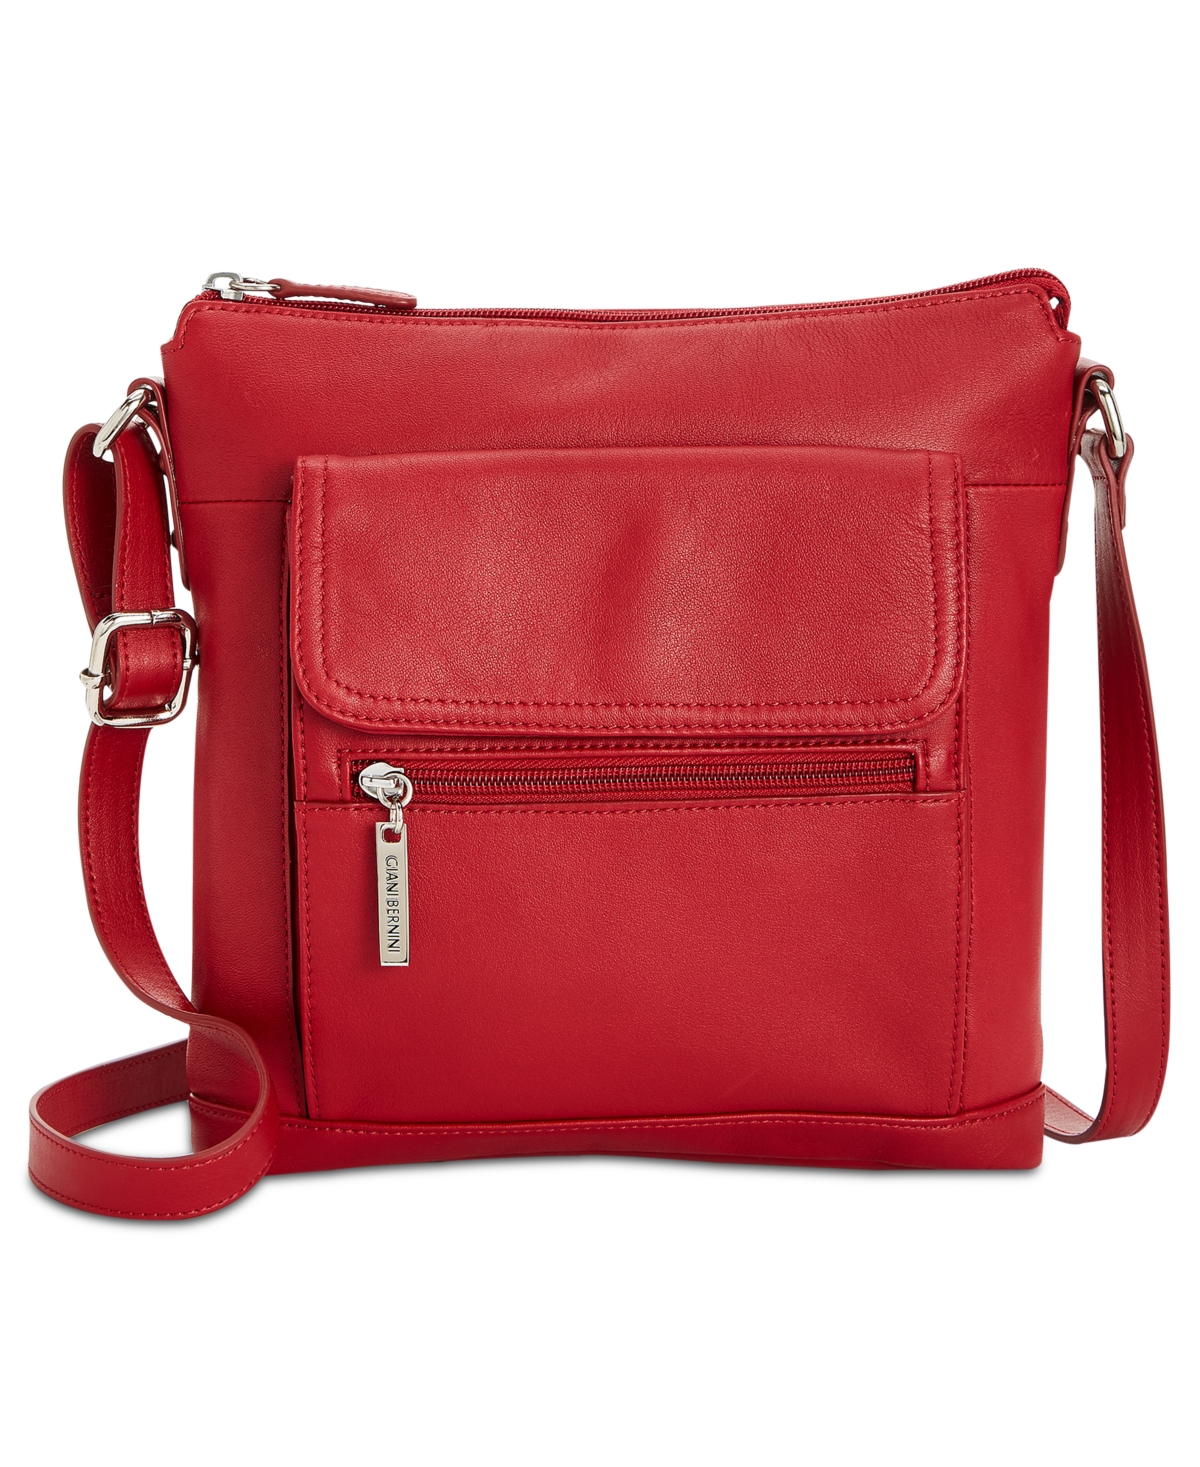 Nappa Leather Venice Crossbody, Created for Macy's - Red/Silver